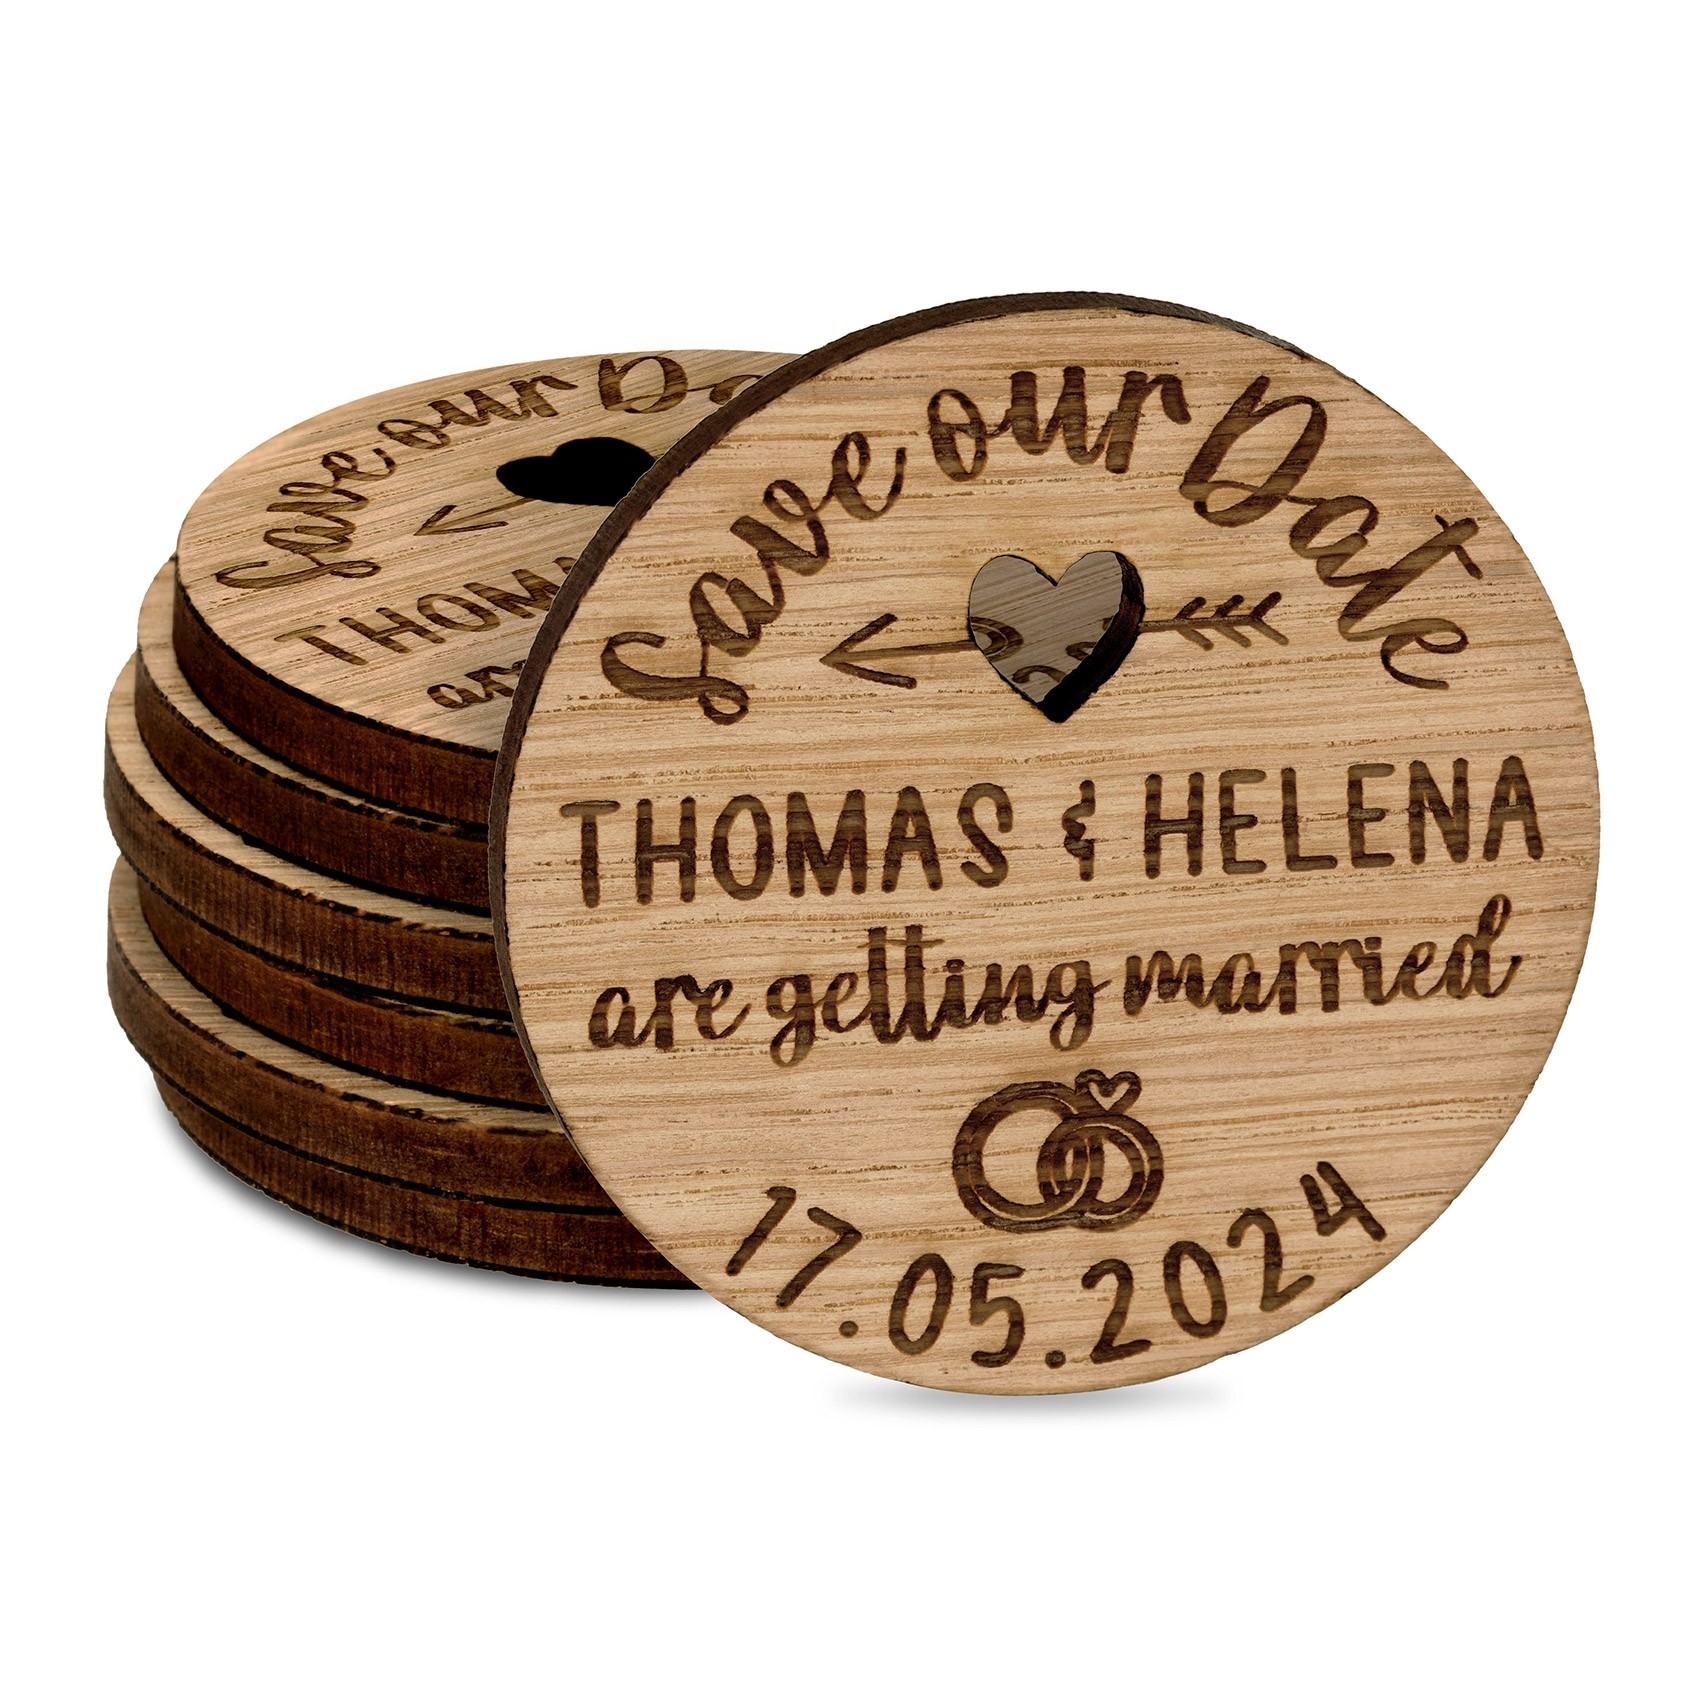 Personalised Wedding Save The Date Invitations Fridge Magnets Cards Love Heart Arrow Wooden Favours Charms Rustic Oak Custom